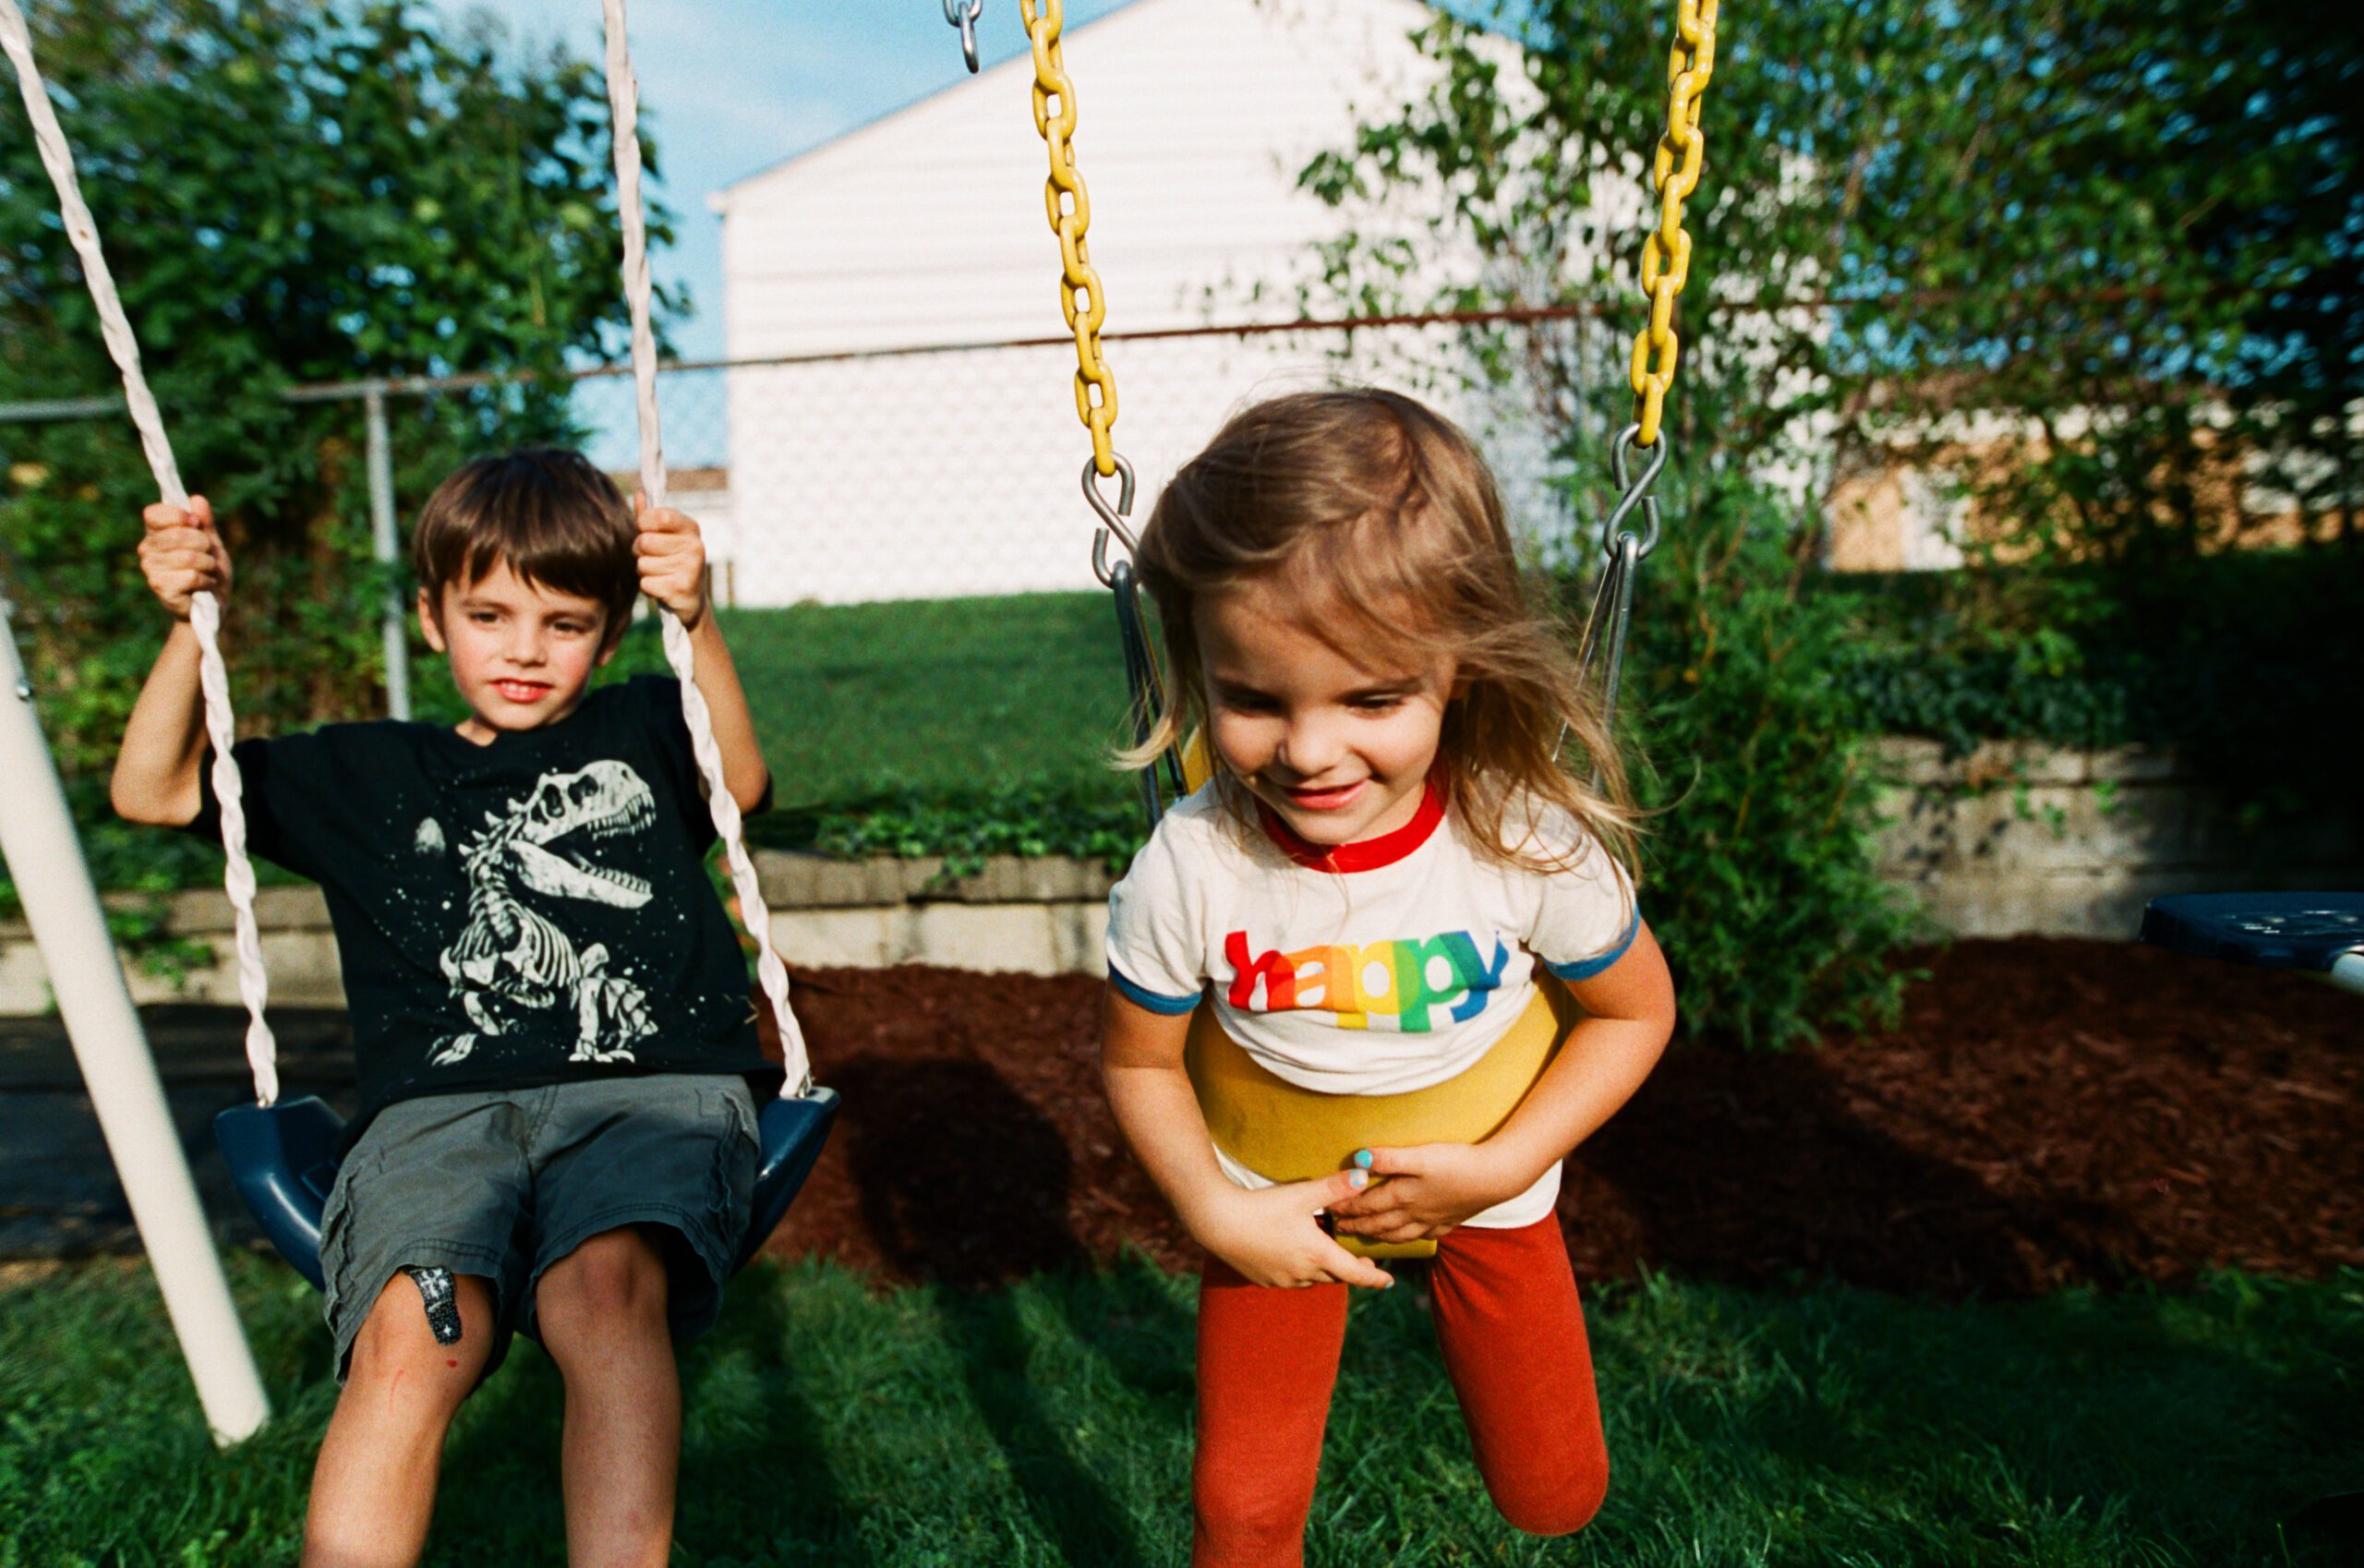 young girl and boy playing on a swing set